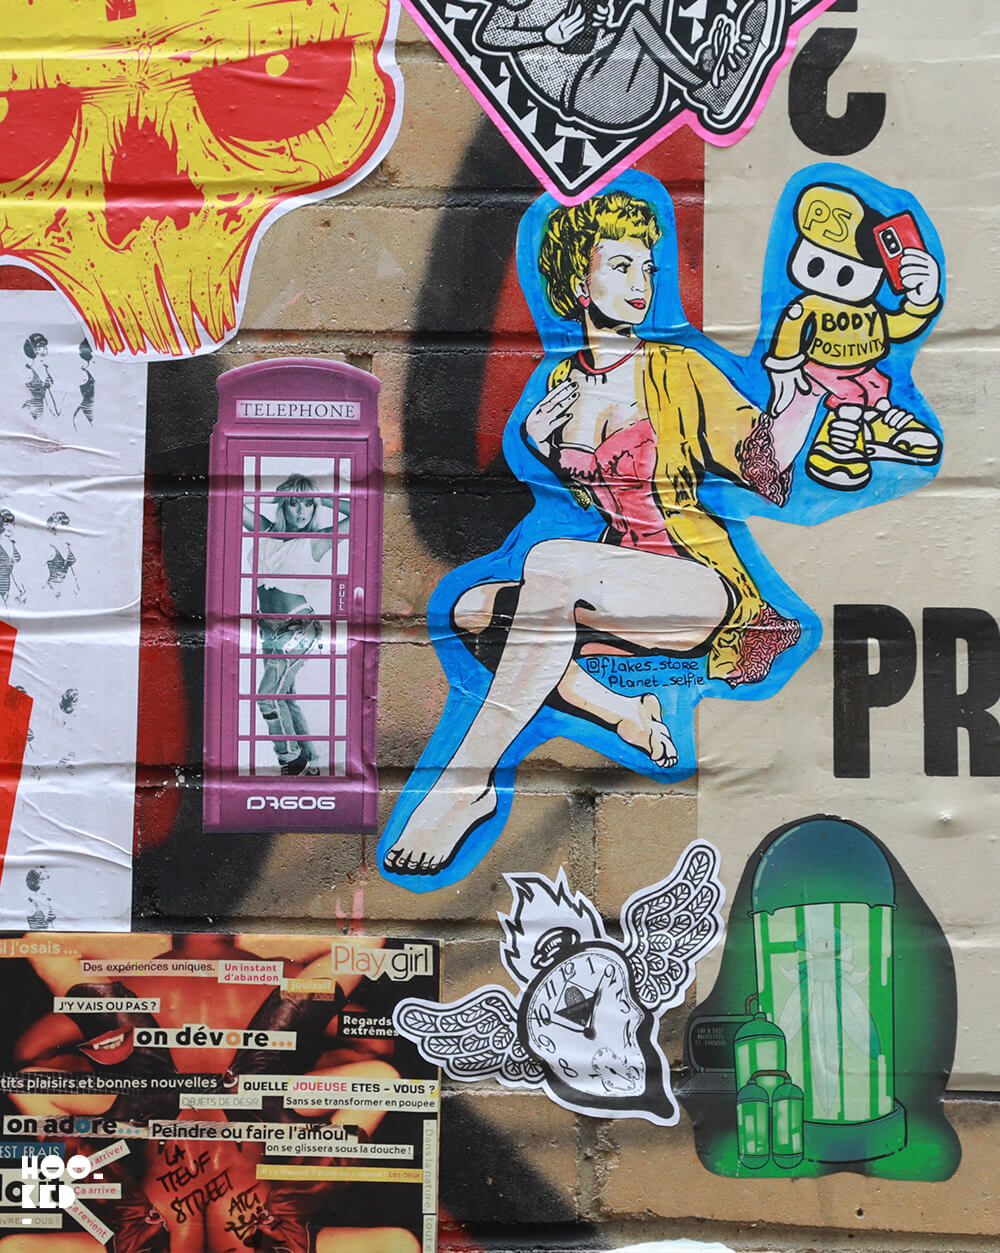 Poster and Paste ups in Shoreditch, London as part of the London International Paste-up Festival